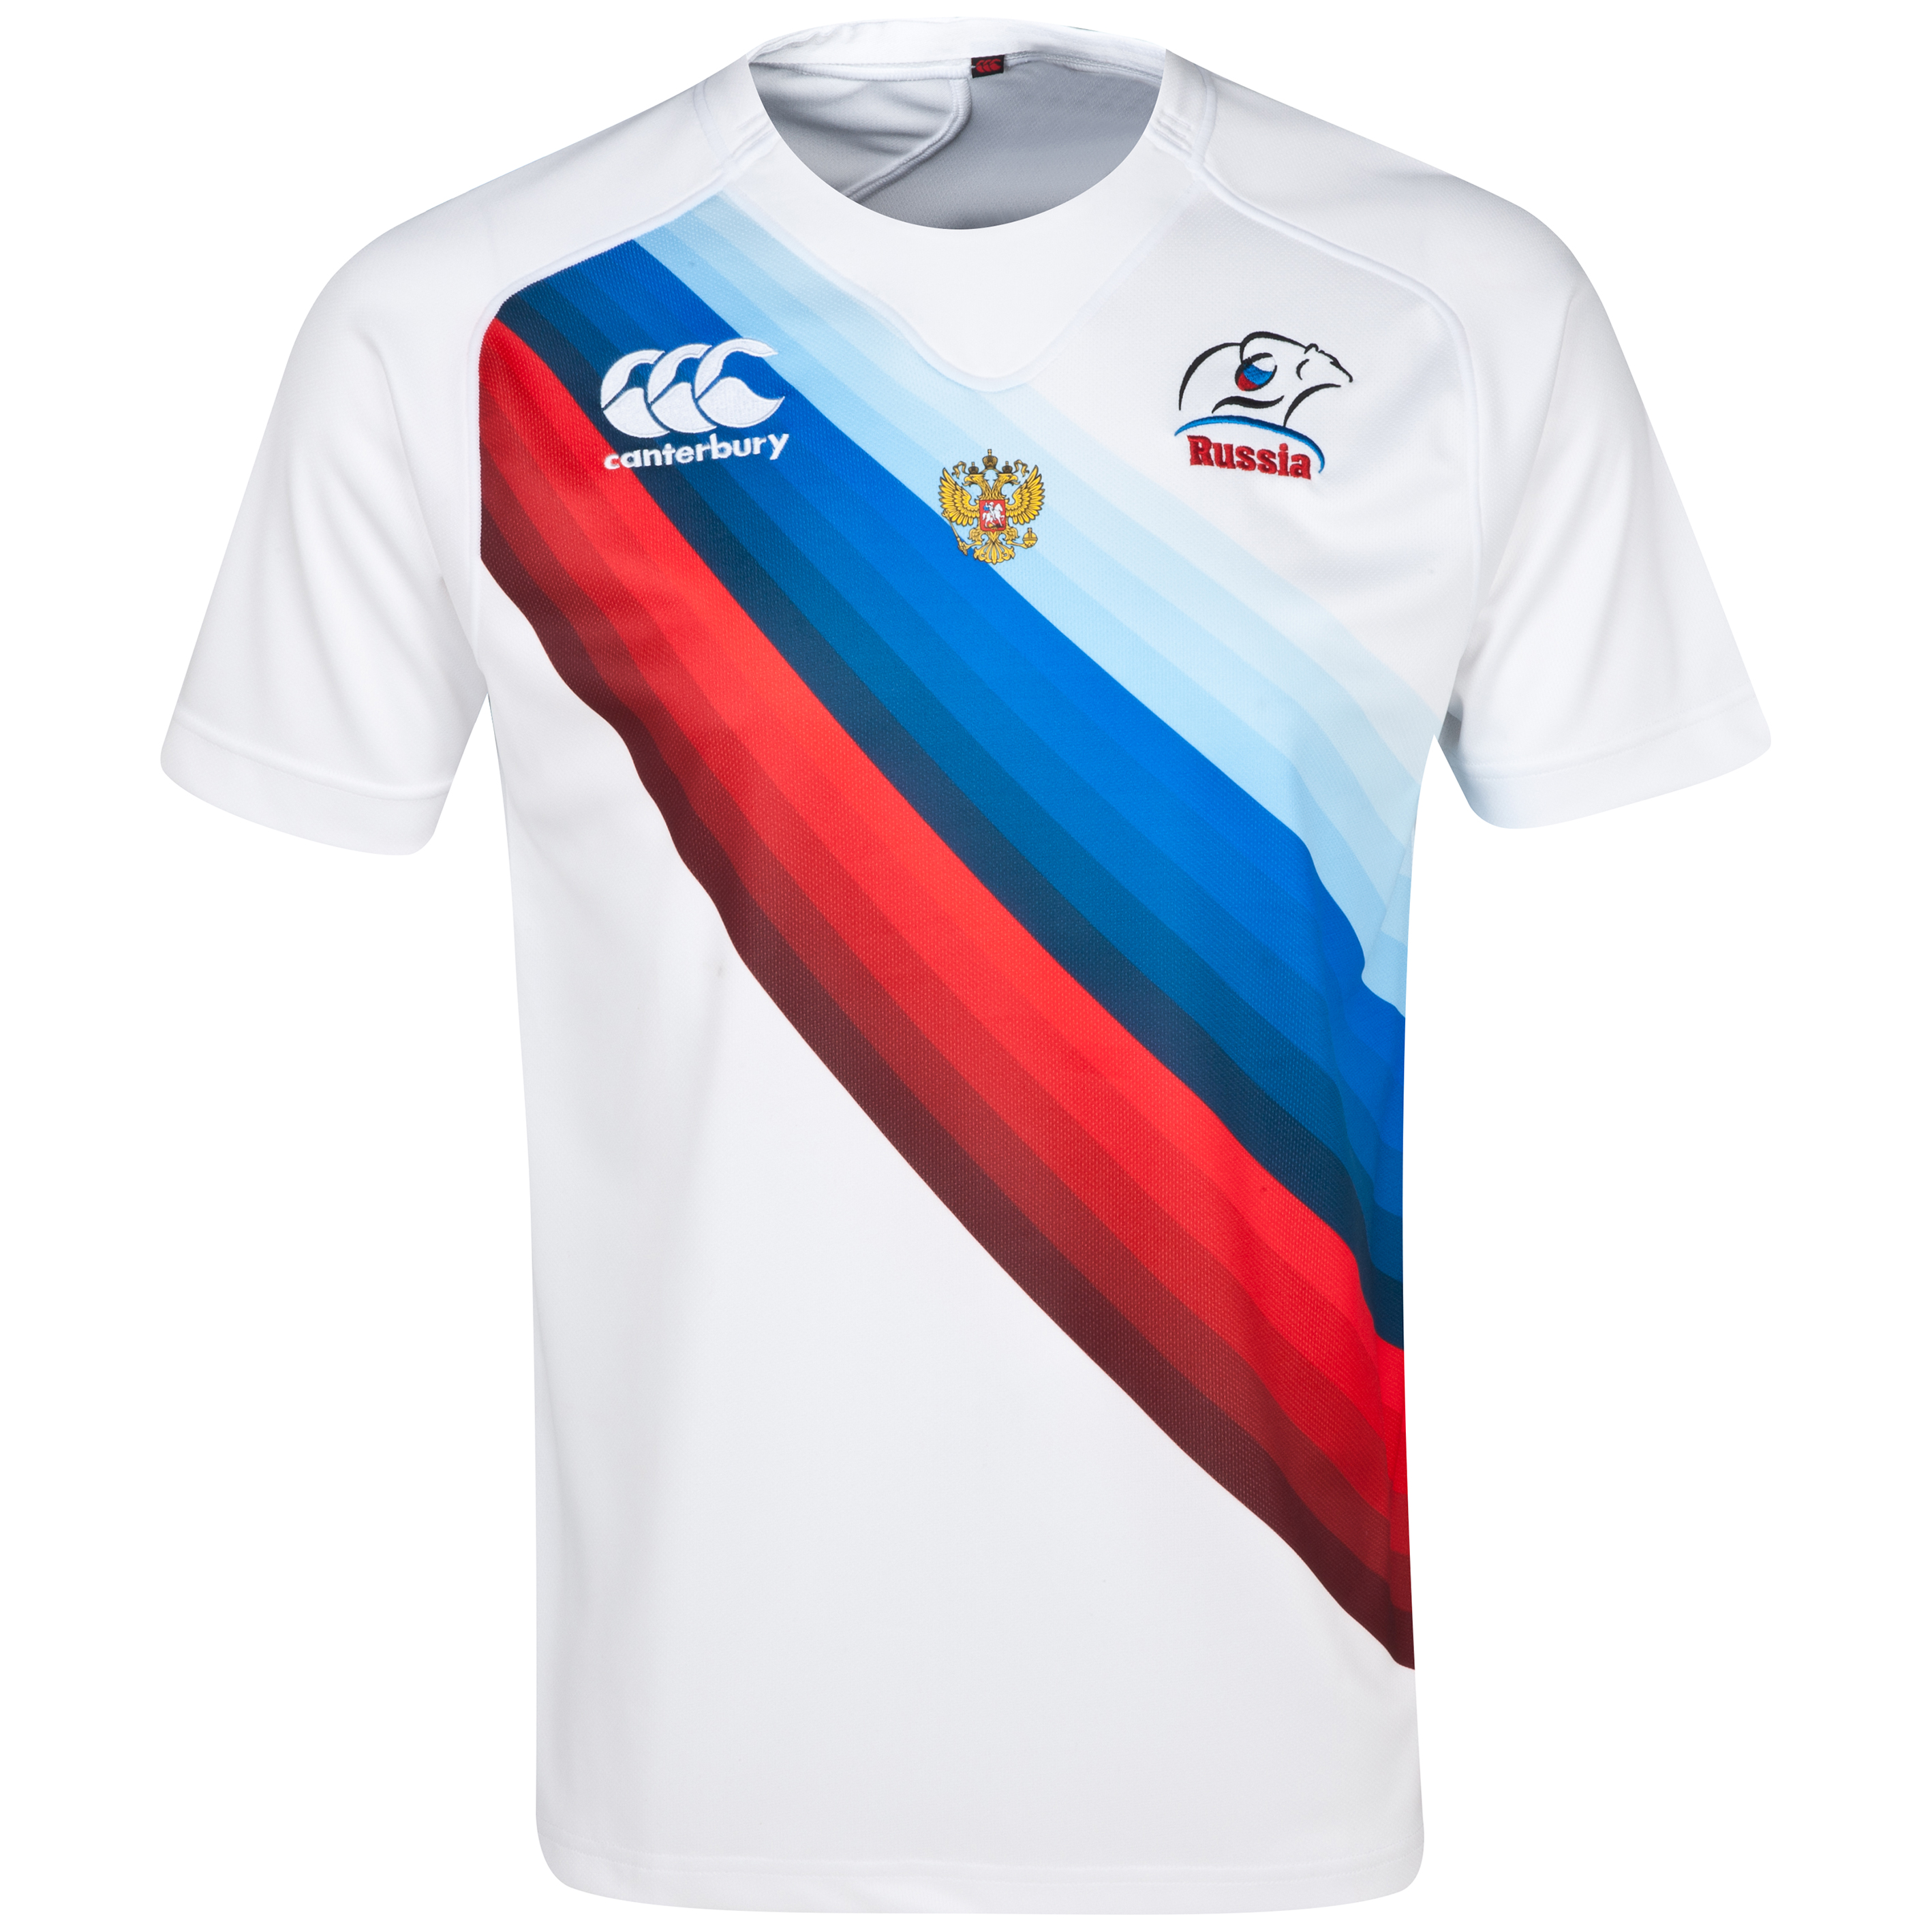 Russia Alternate 7inchs Rugby Pro Shirt 2013/14